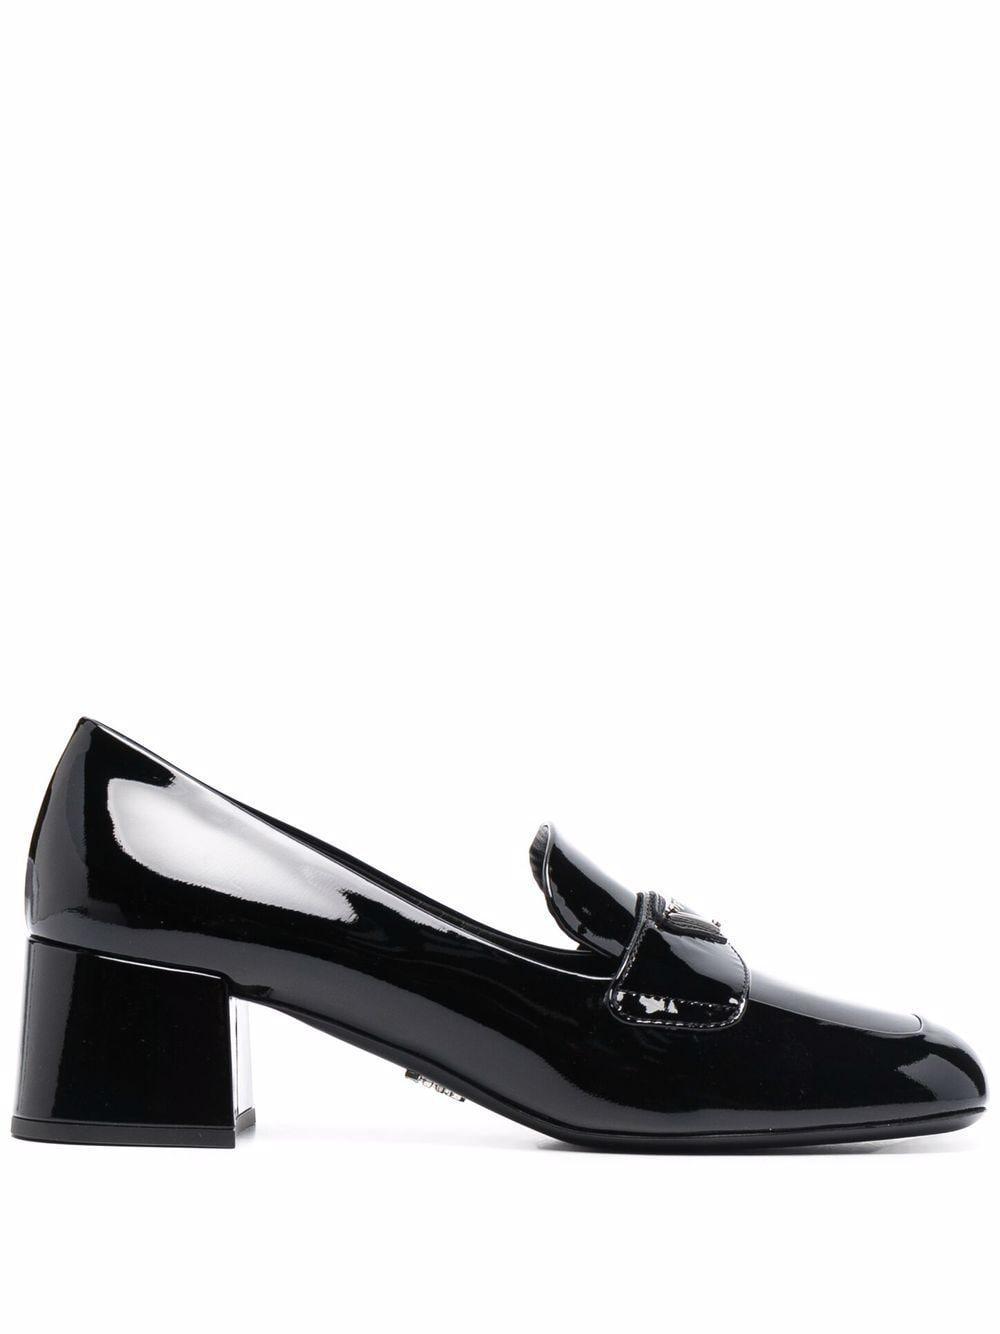 Prada Triangle-logo Patent Leather Loafers in Black | Lyst